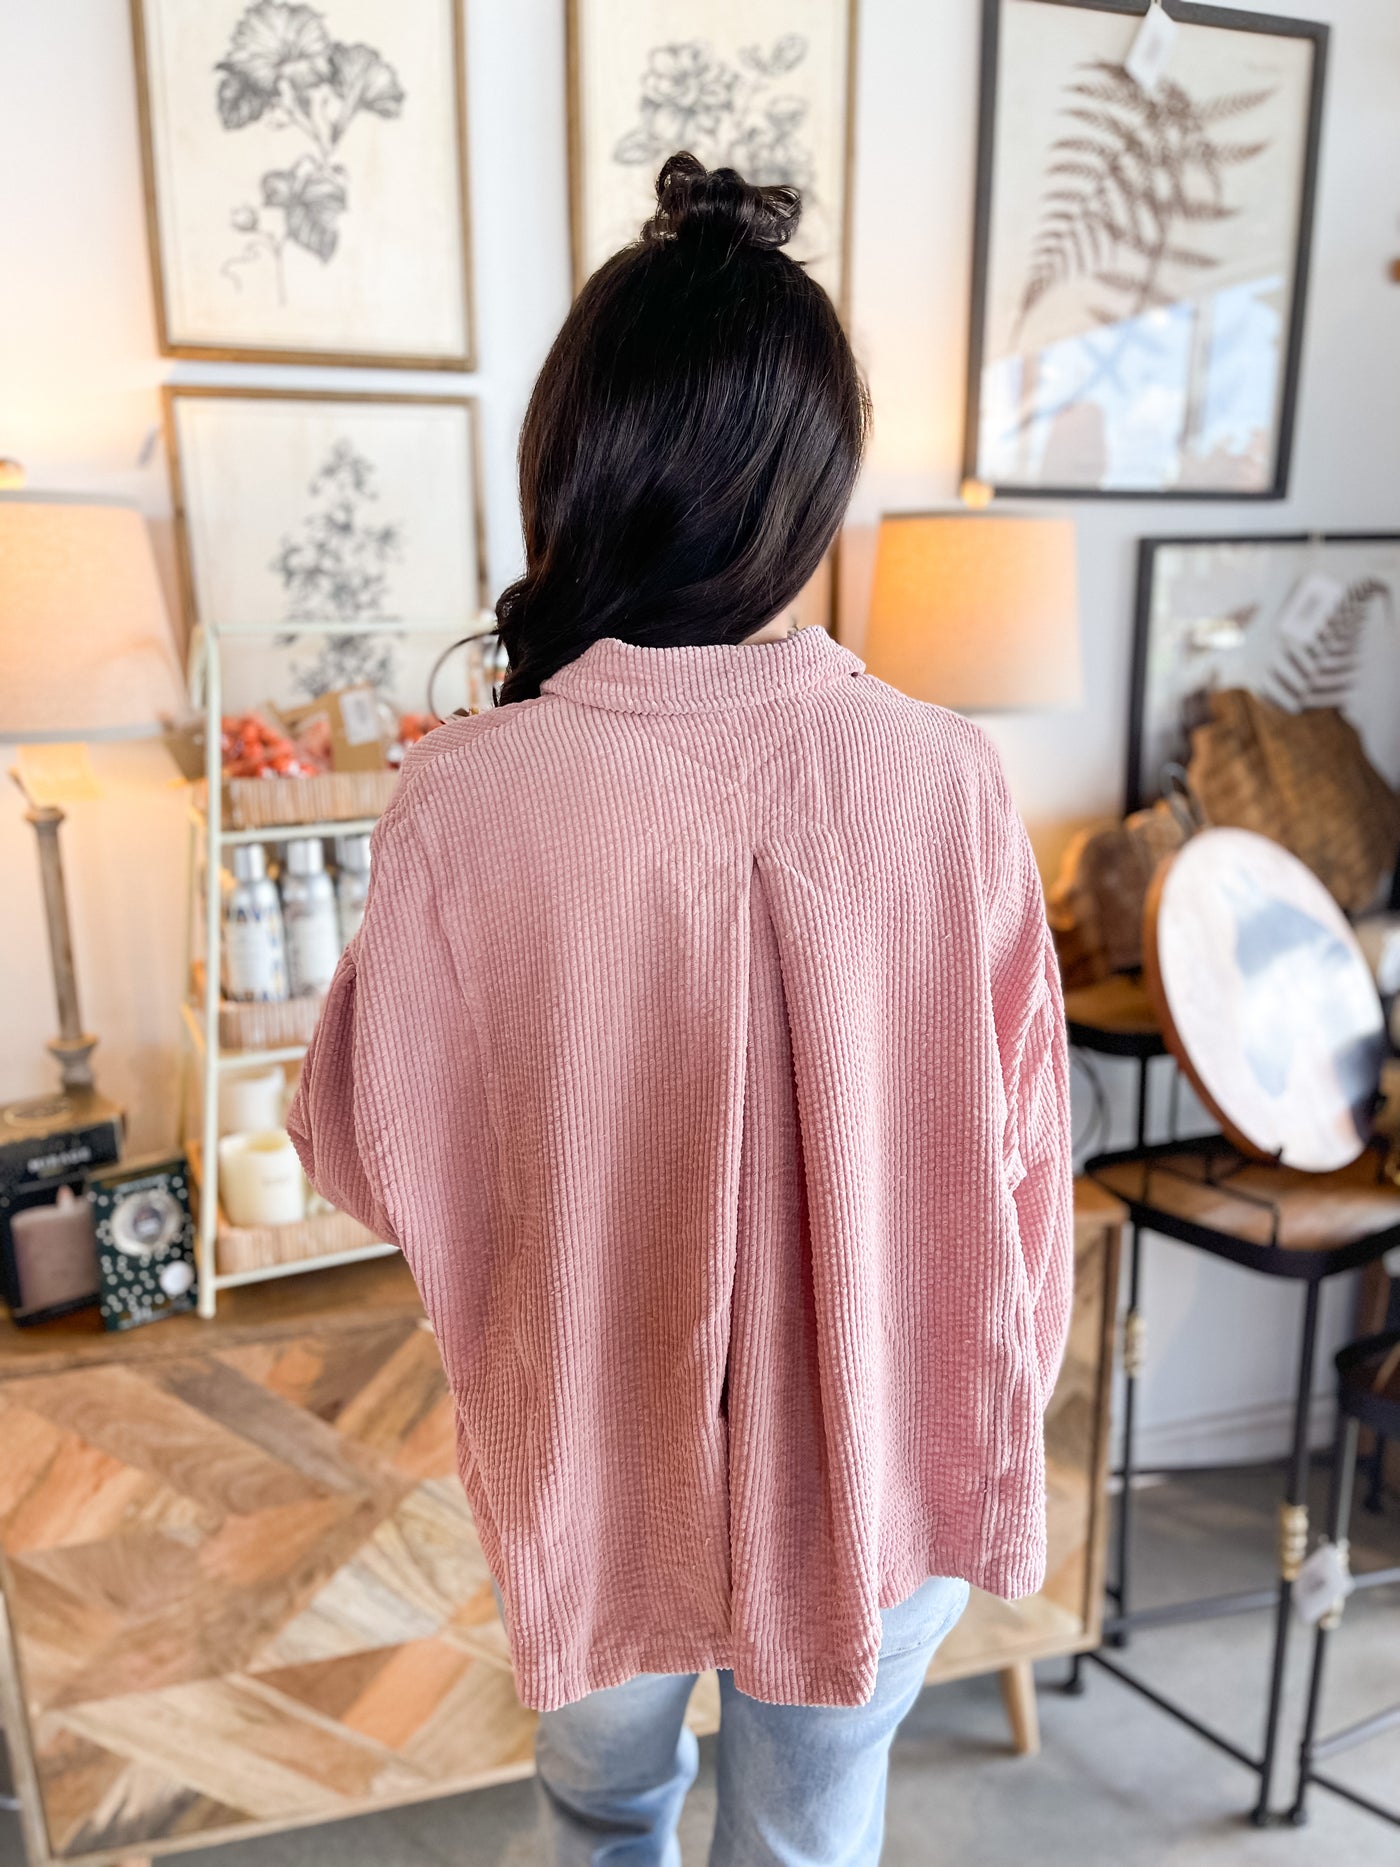 Blush Cord Button Up Top